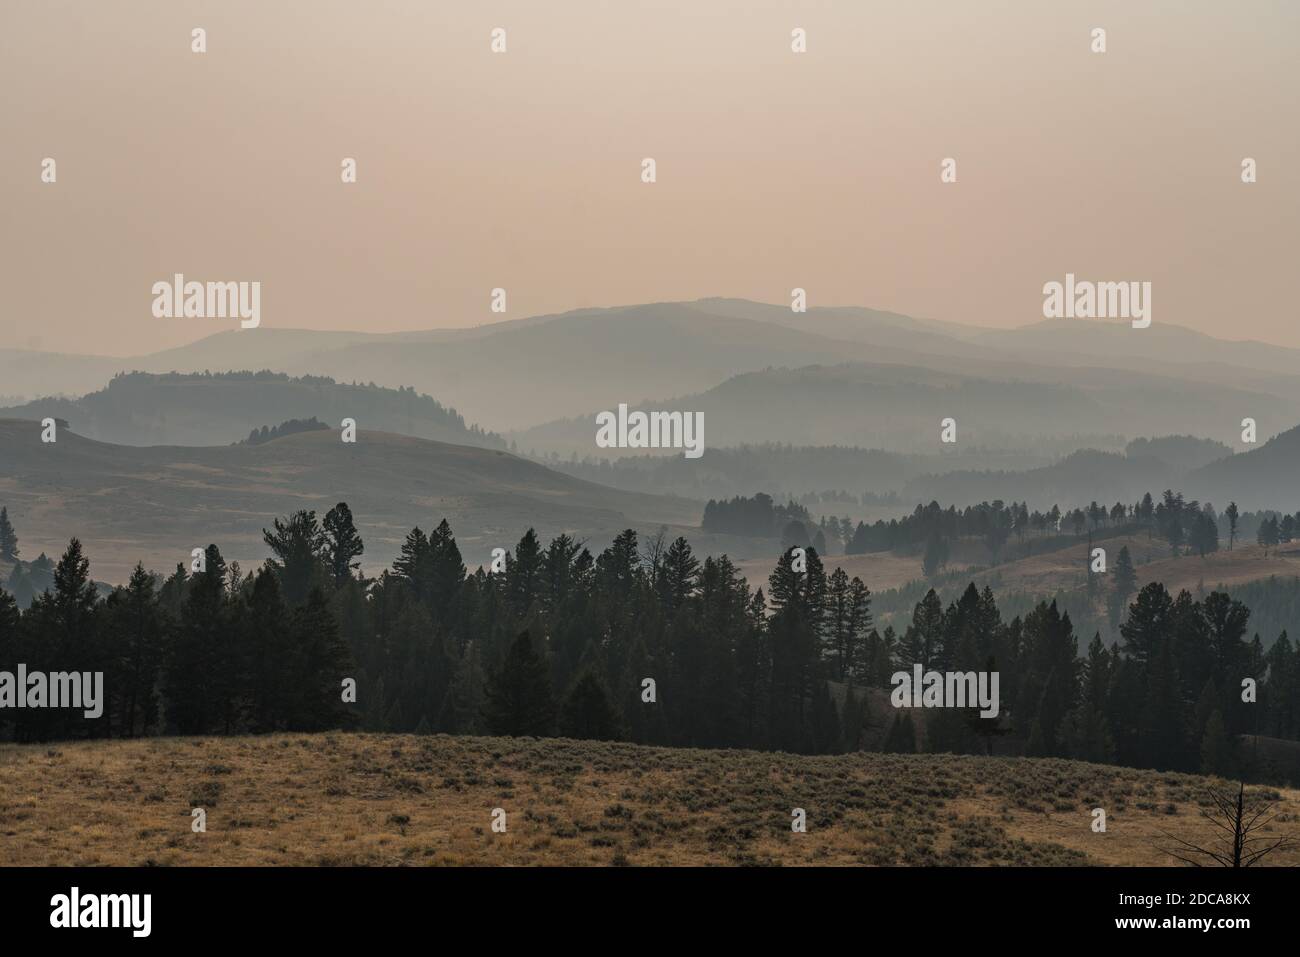 Absaroka Mountain Range in Yellowstone National Park in Wyoming, USA.  The hazy skies are smoky from wildfires in the West. Stock Photo